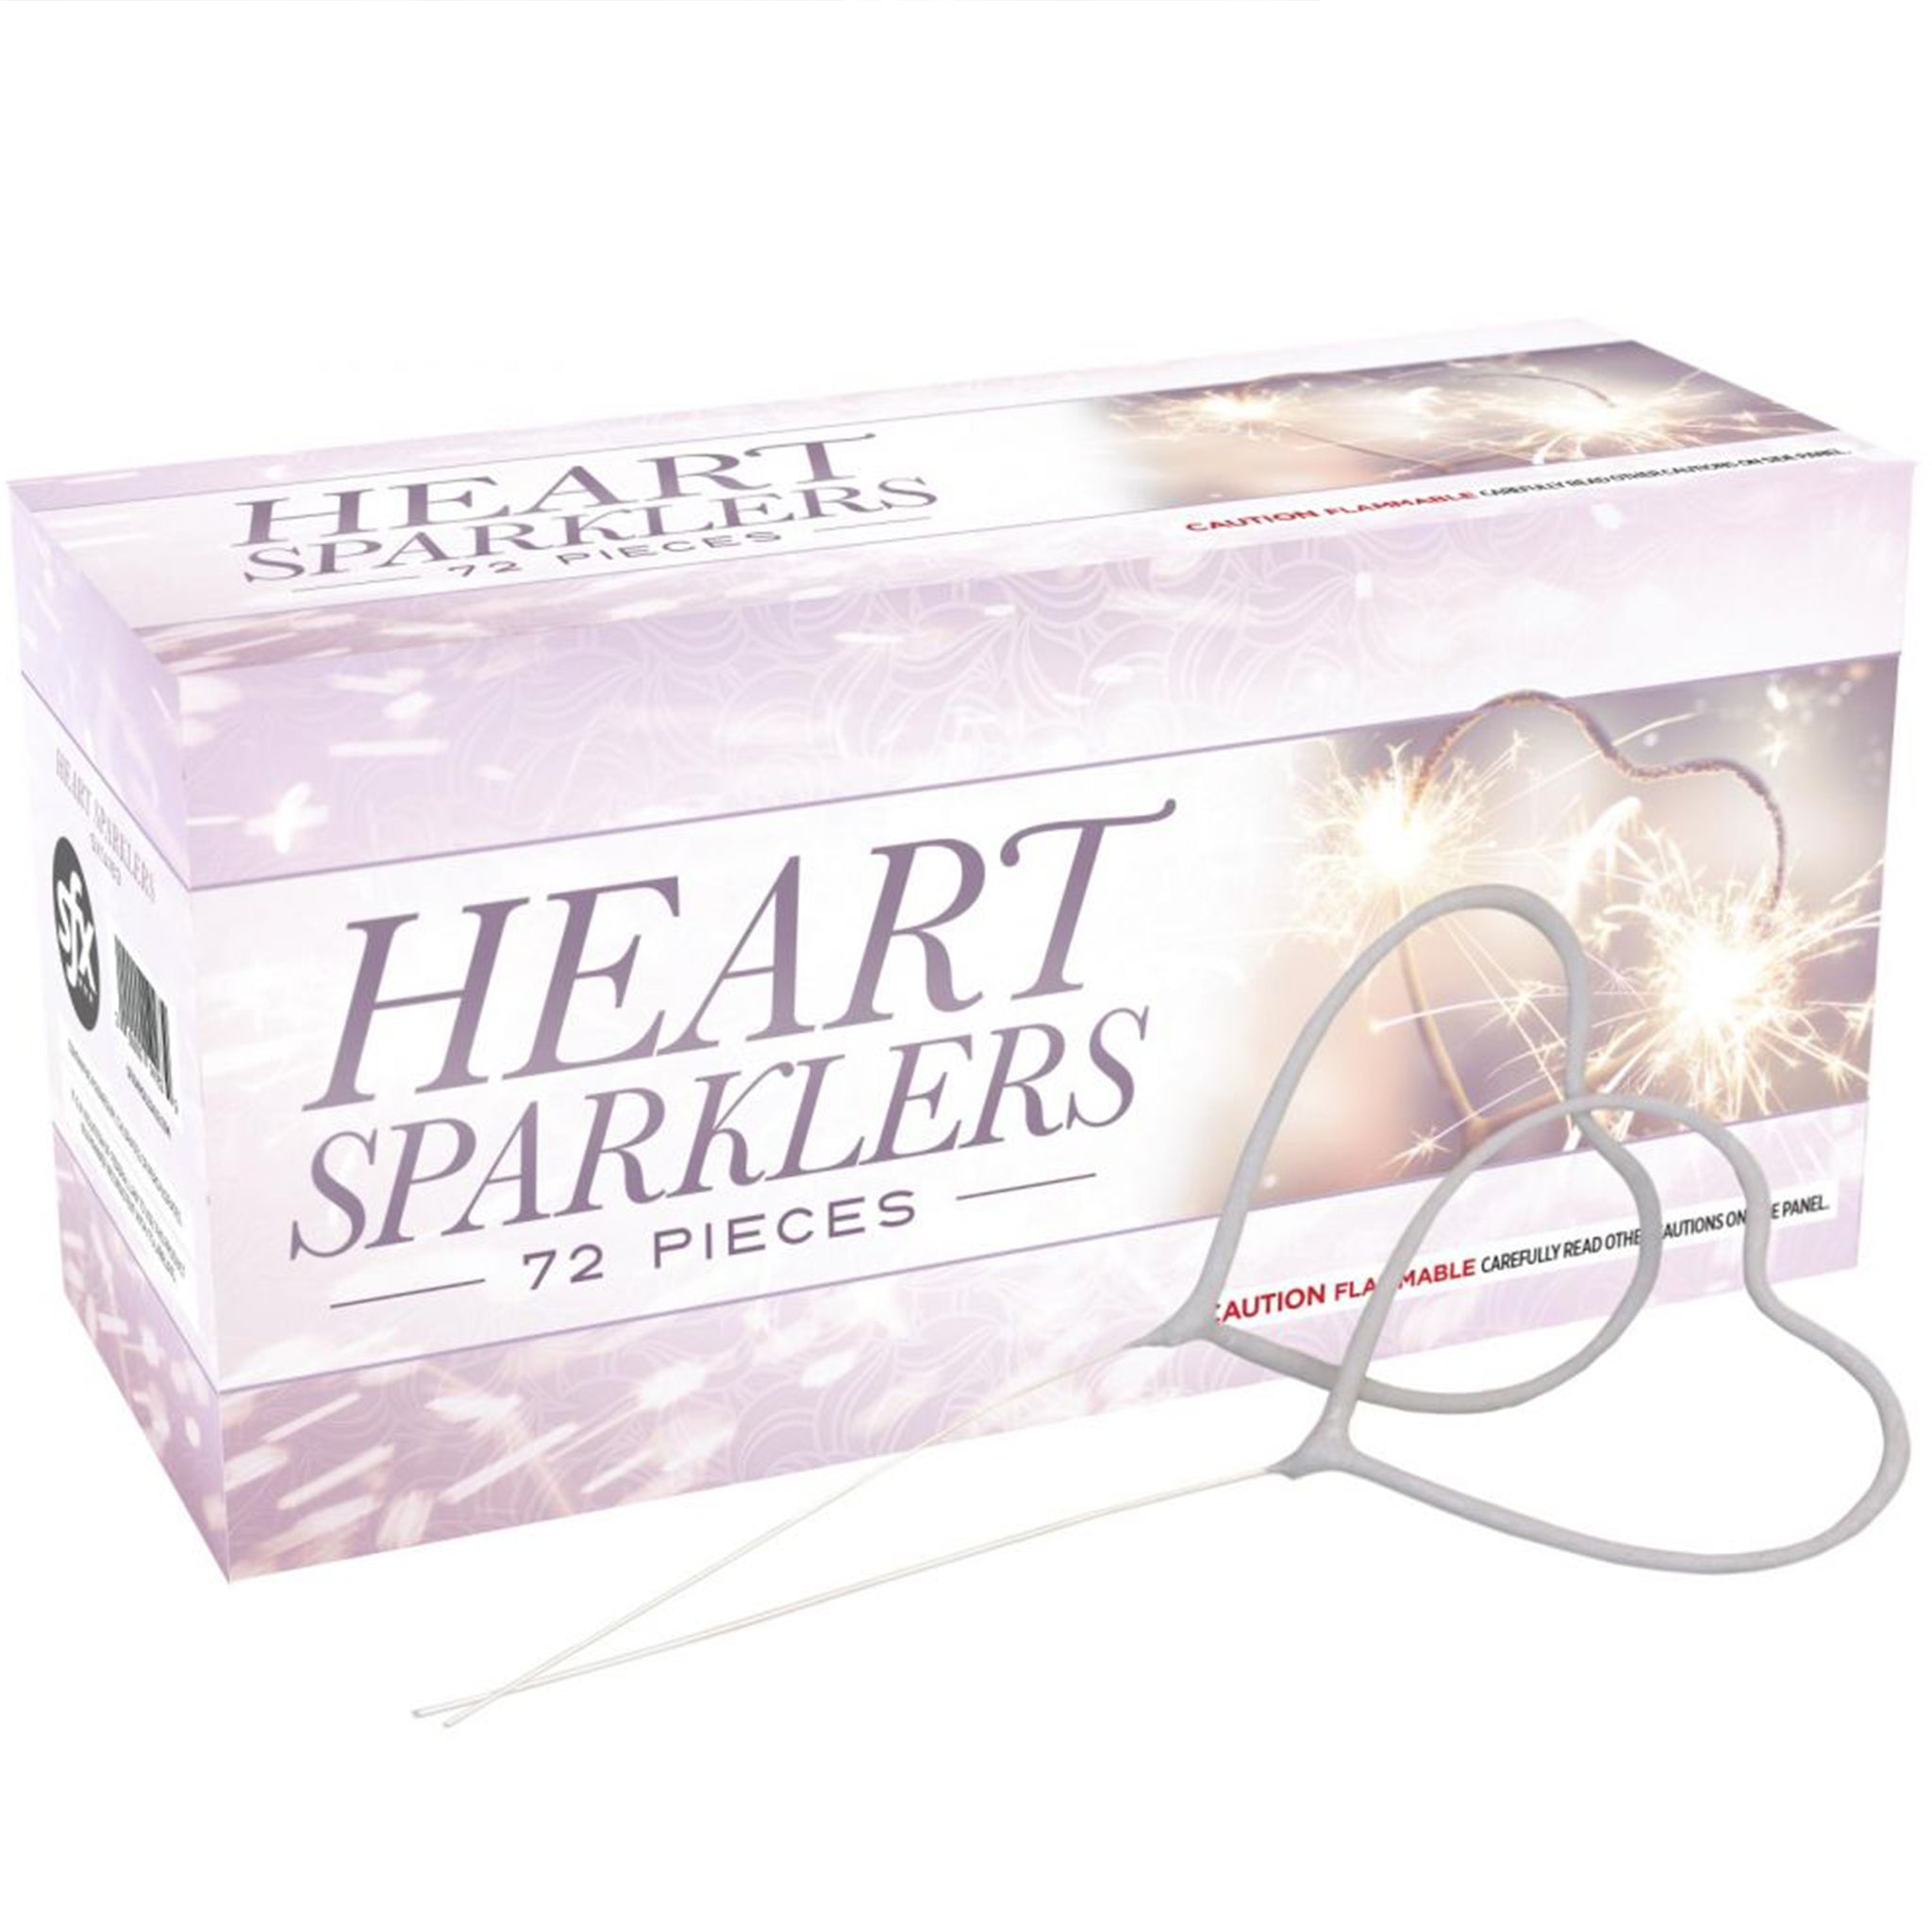 Heart Shaped Sparklers